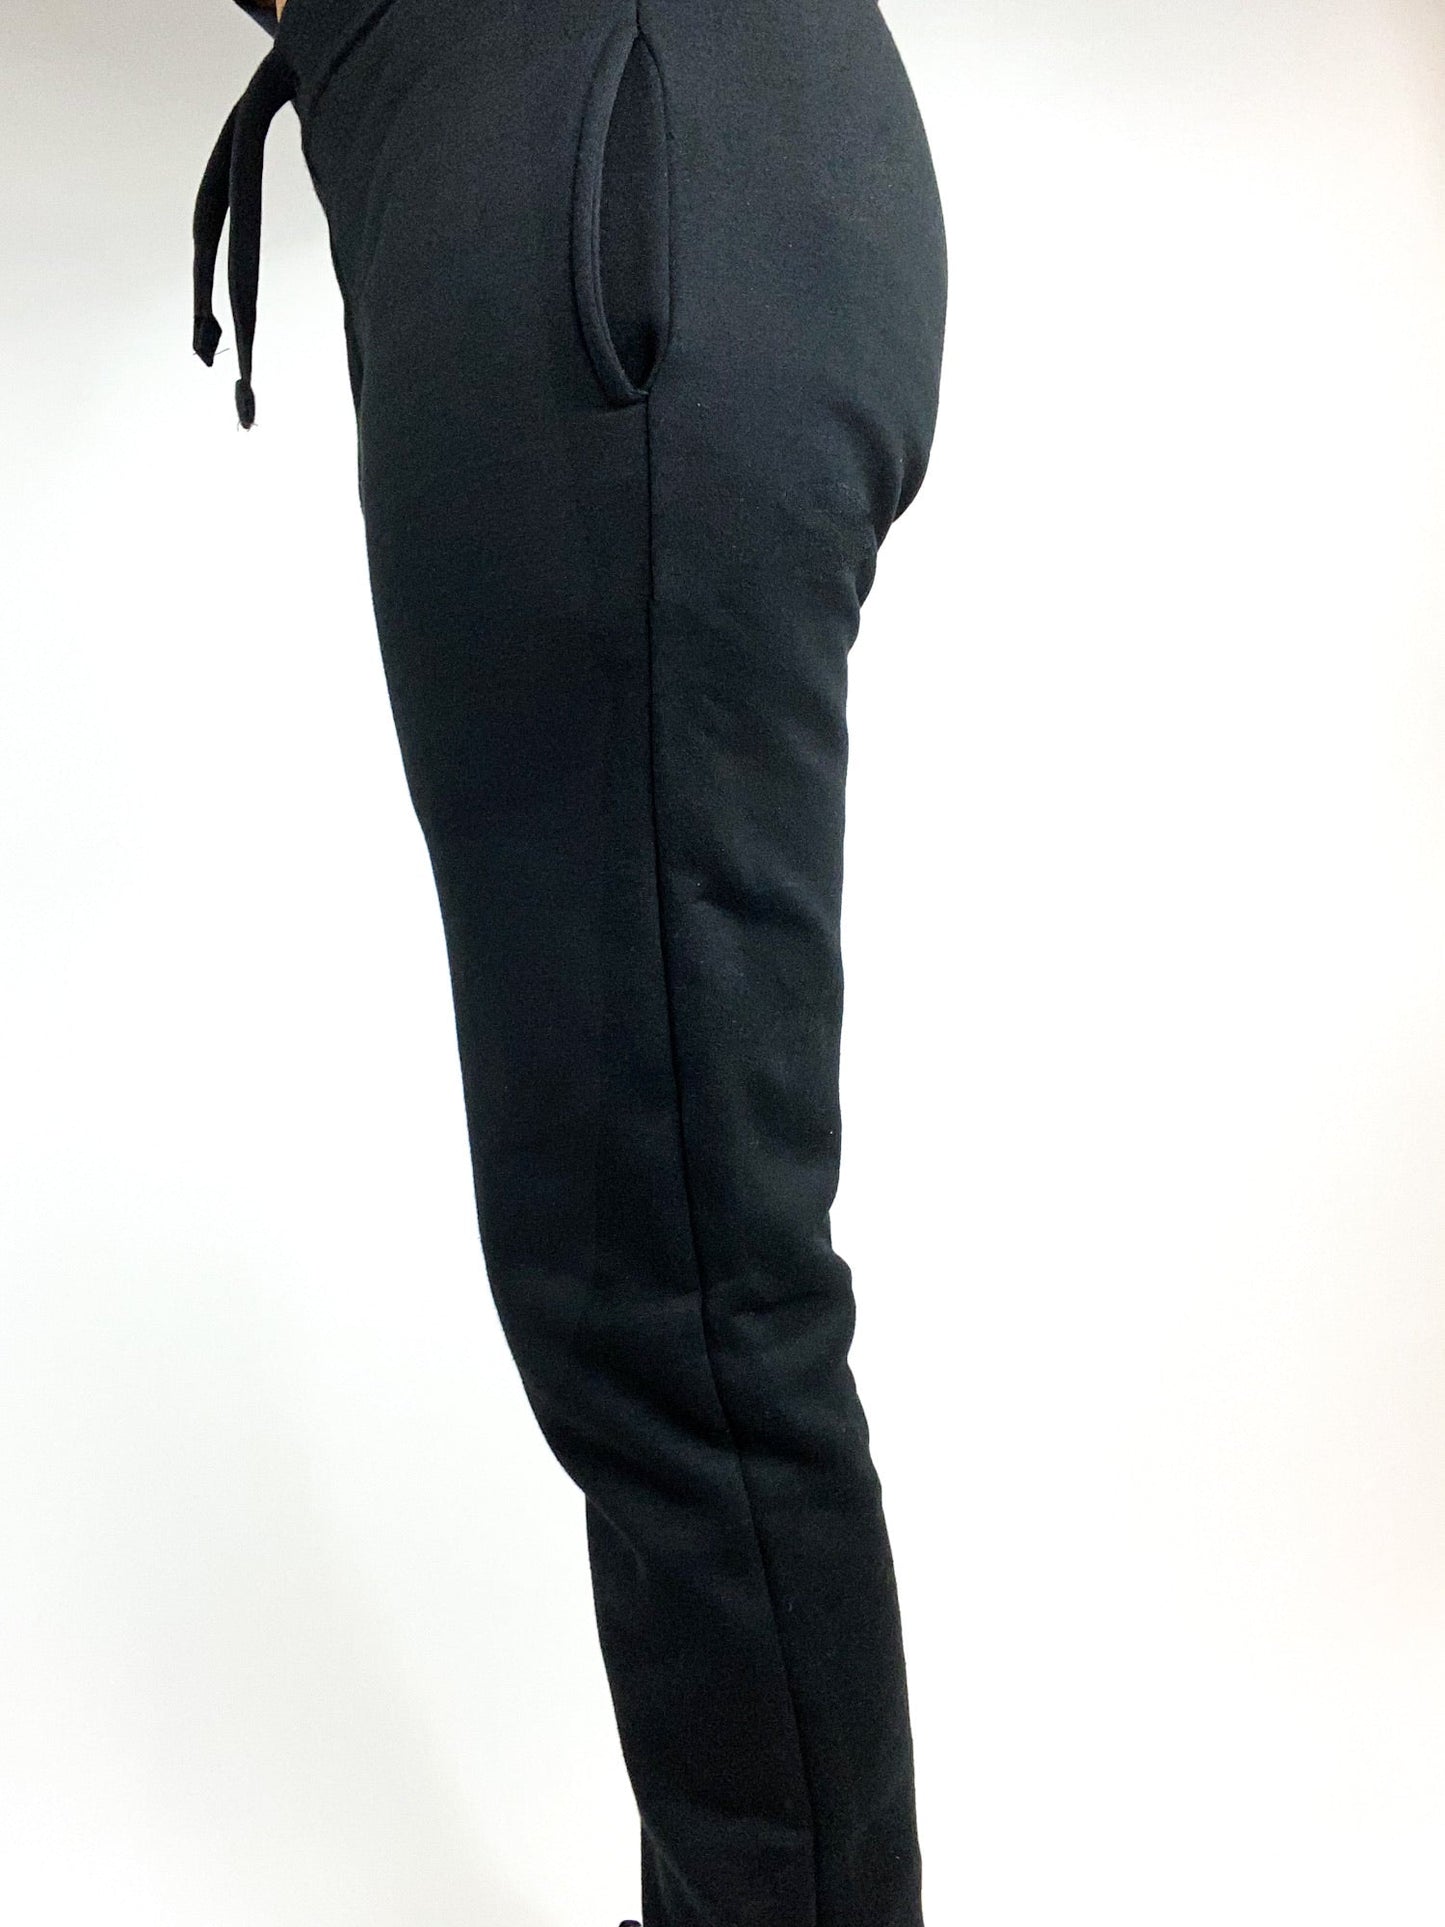 Tall Unisex Black Sweatpants ( Pre Order Only)